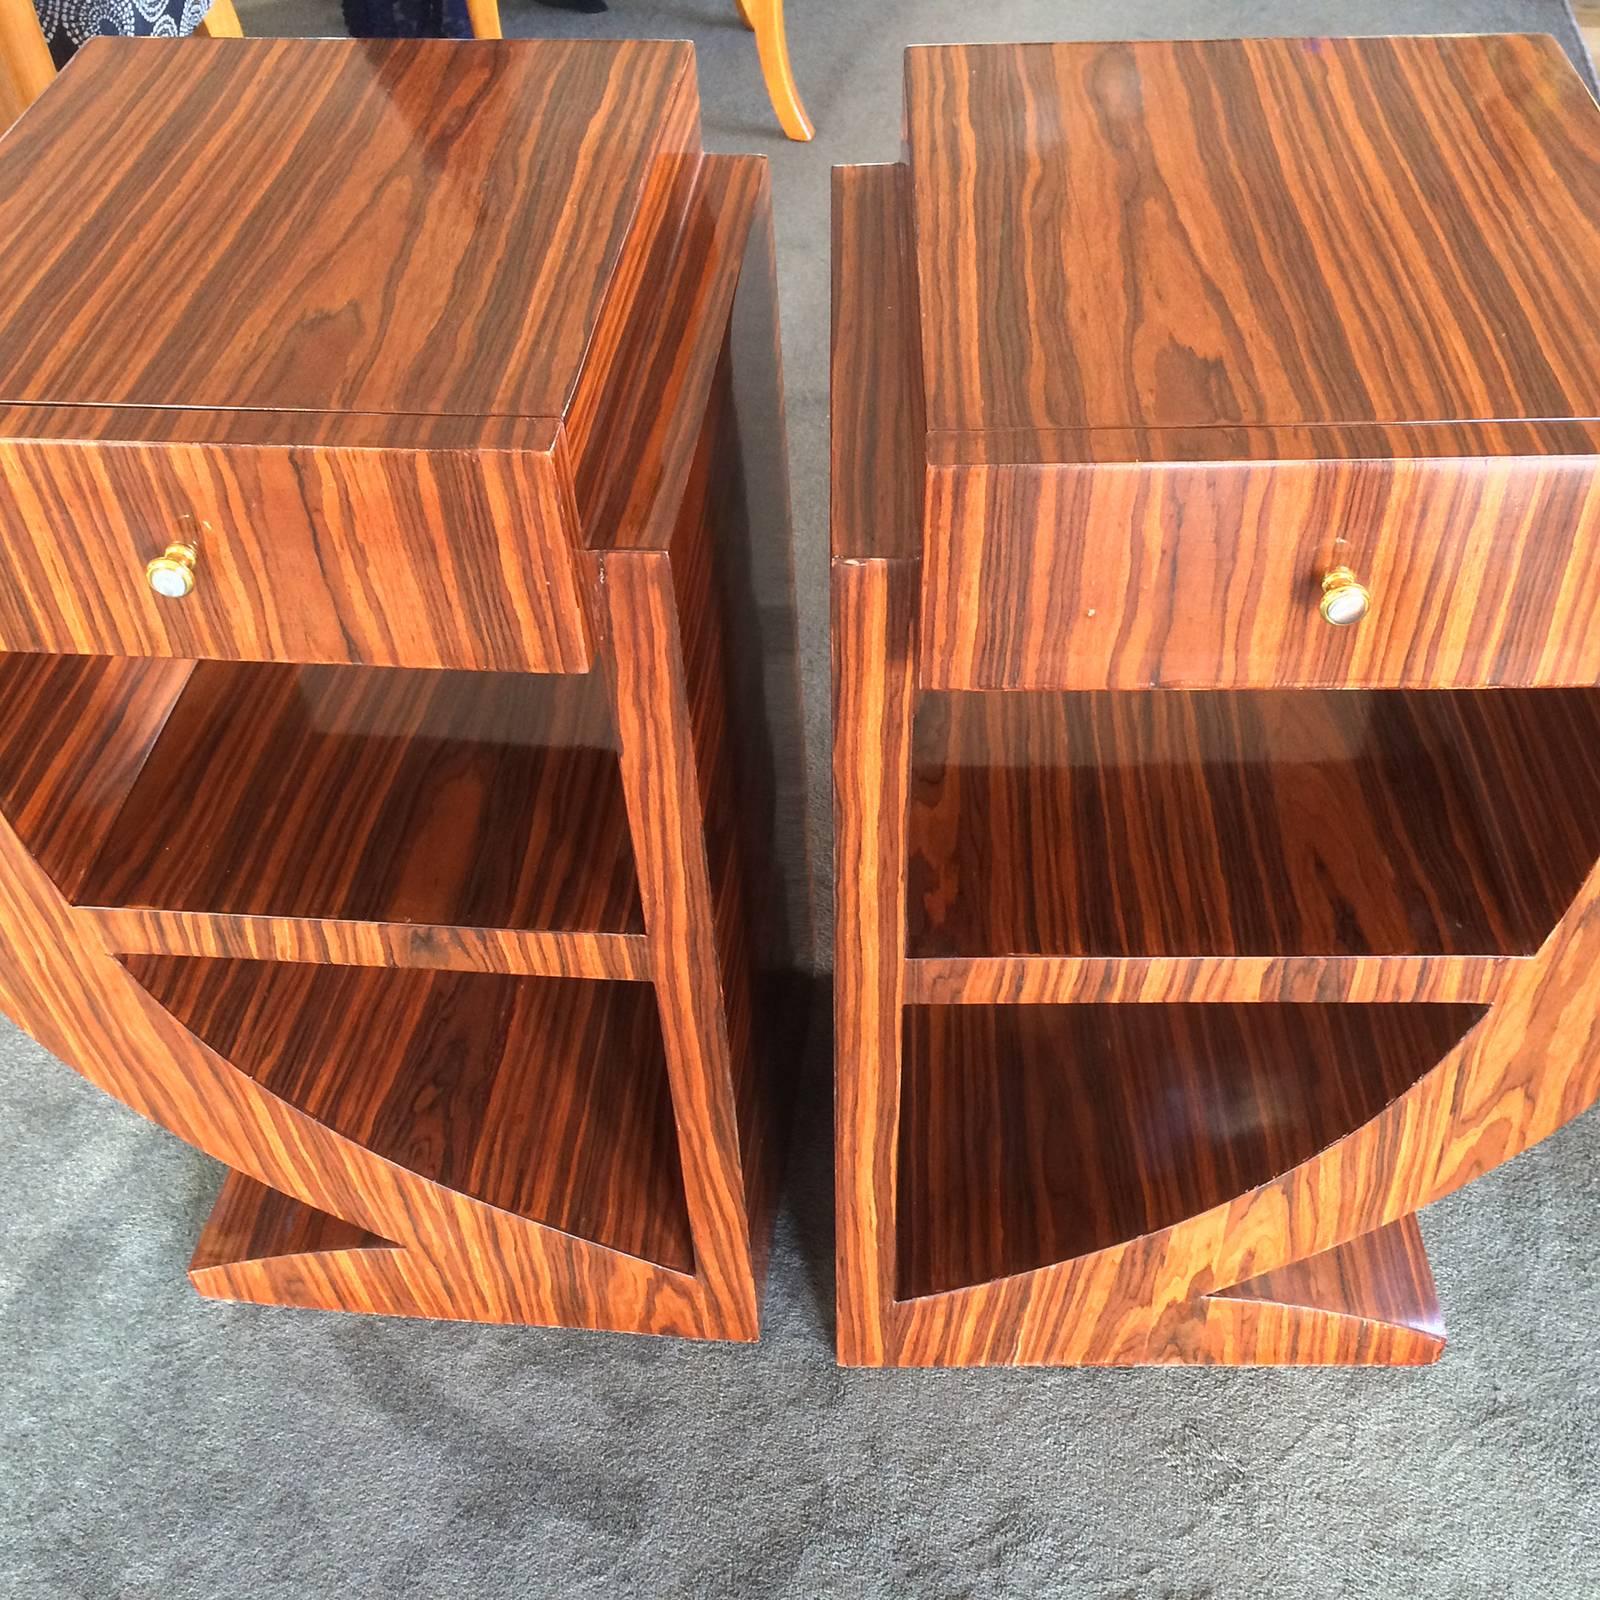 Art Deco style pair of ultra geometric, bedside or sofa tables in Makassar. Each have an upper, full depth draw, with a bookshelf or display area below. The amazing, quality and stepped and curved design, would have to be one of the best examples we